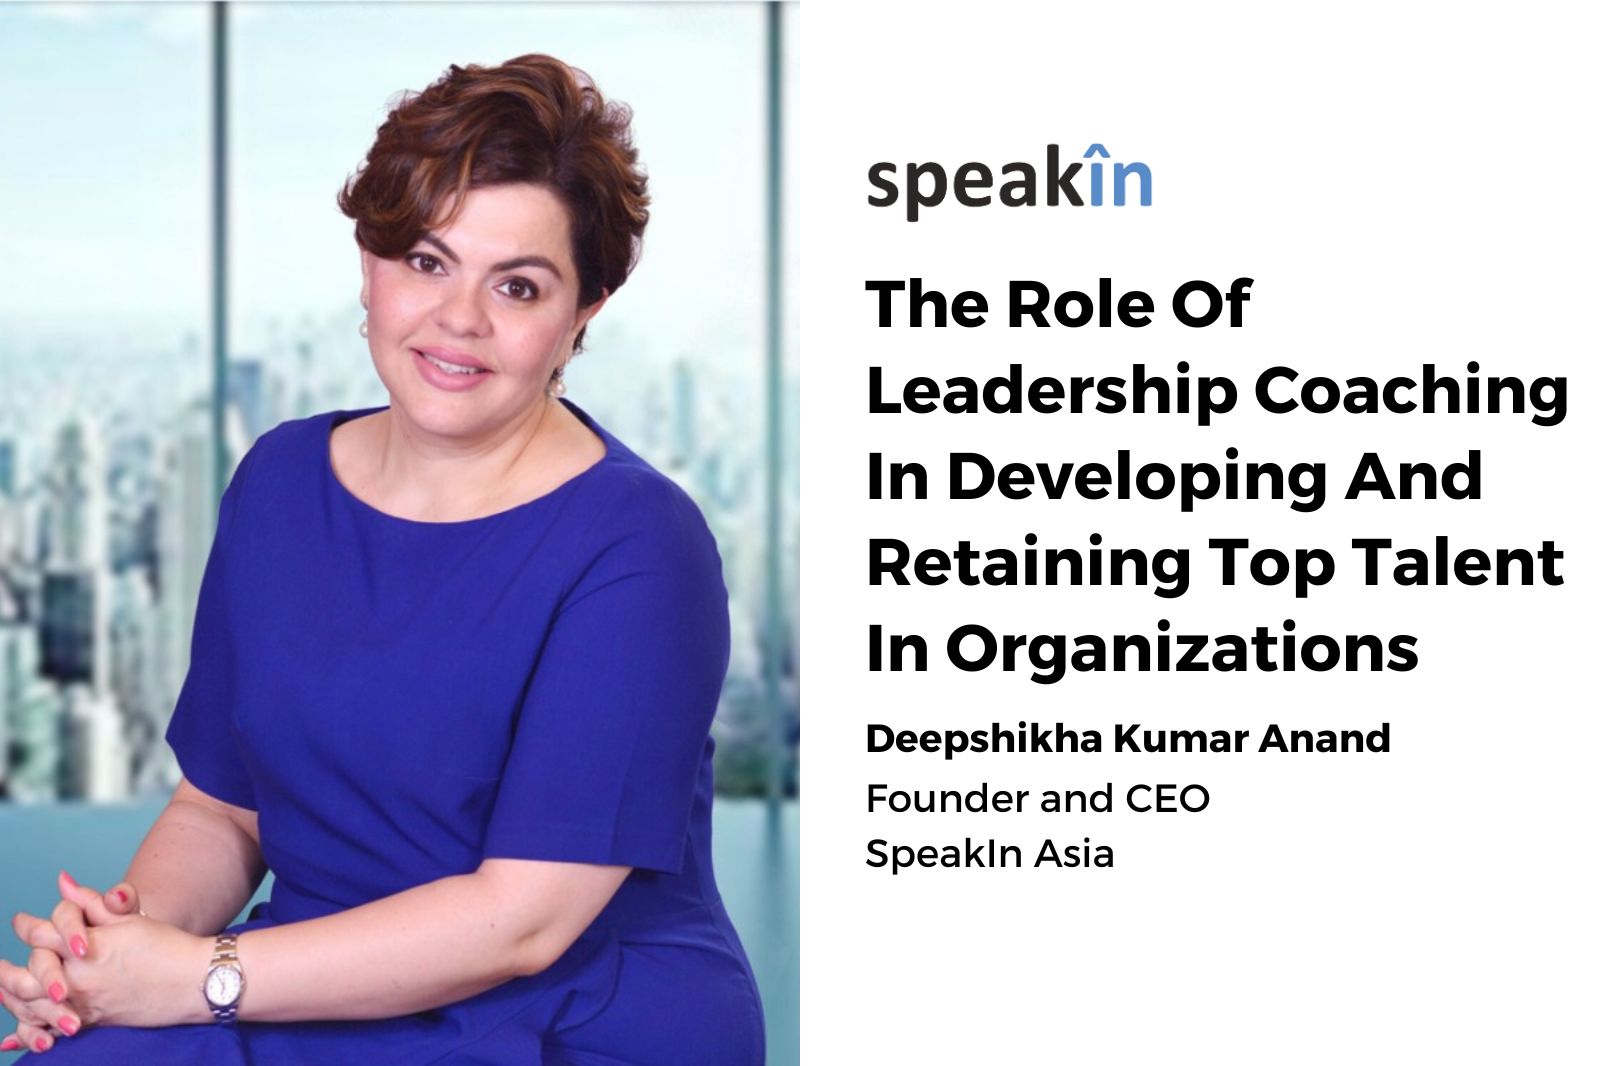 The Role Of Leadership Coaching In Developing And Retaining Top Talent In Organizations